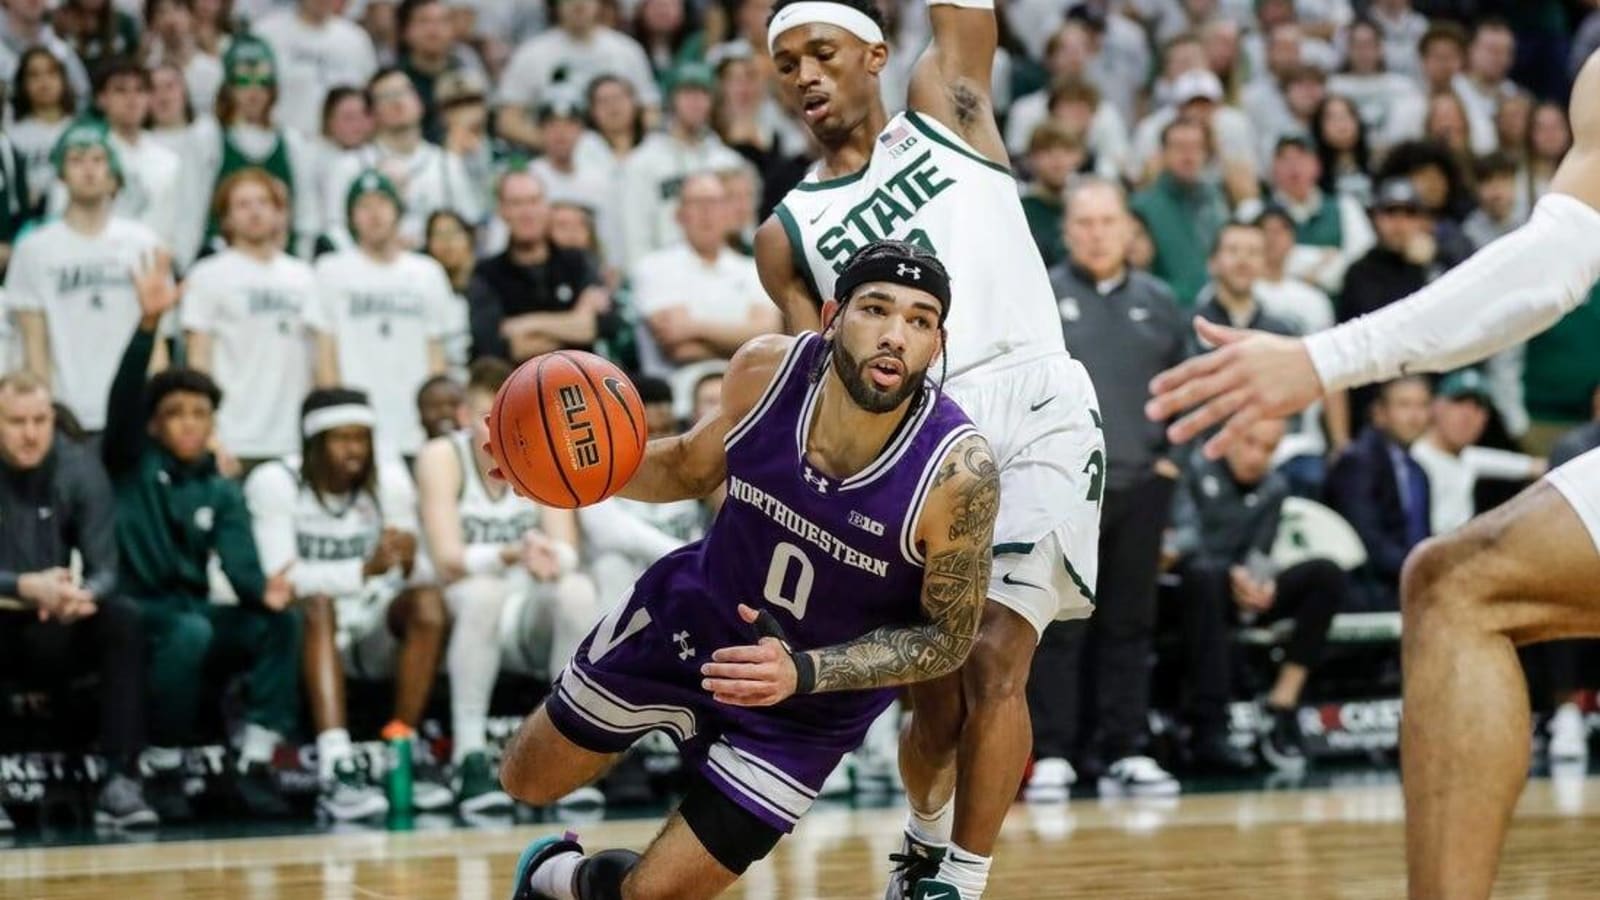 Northwestern chases resume-building win over Wisconsin